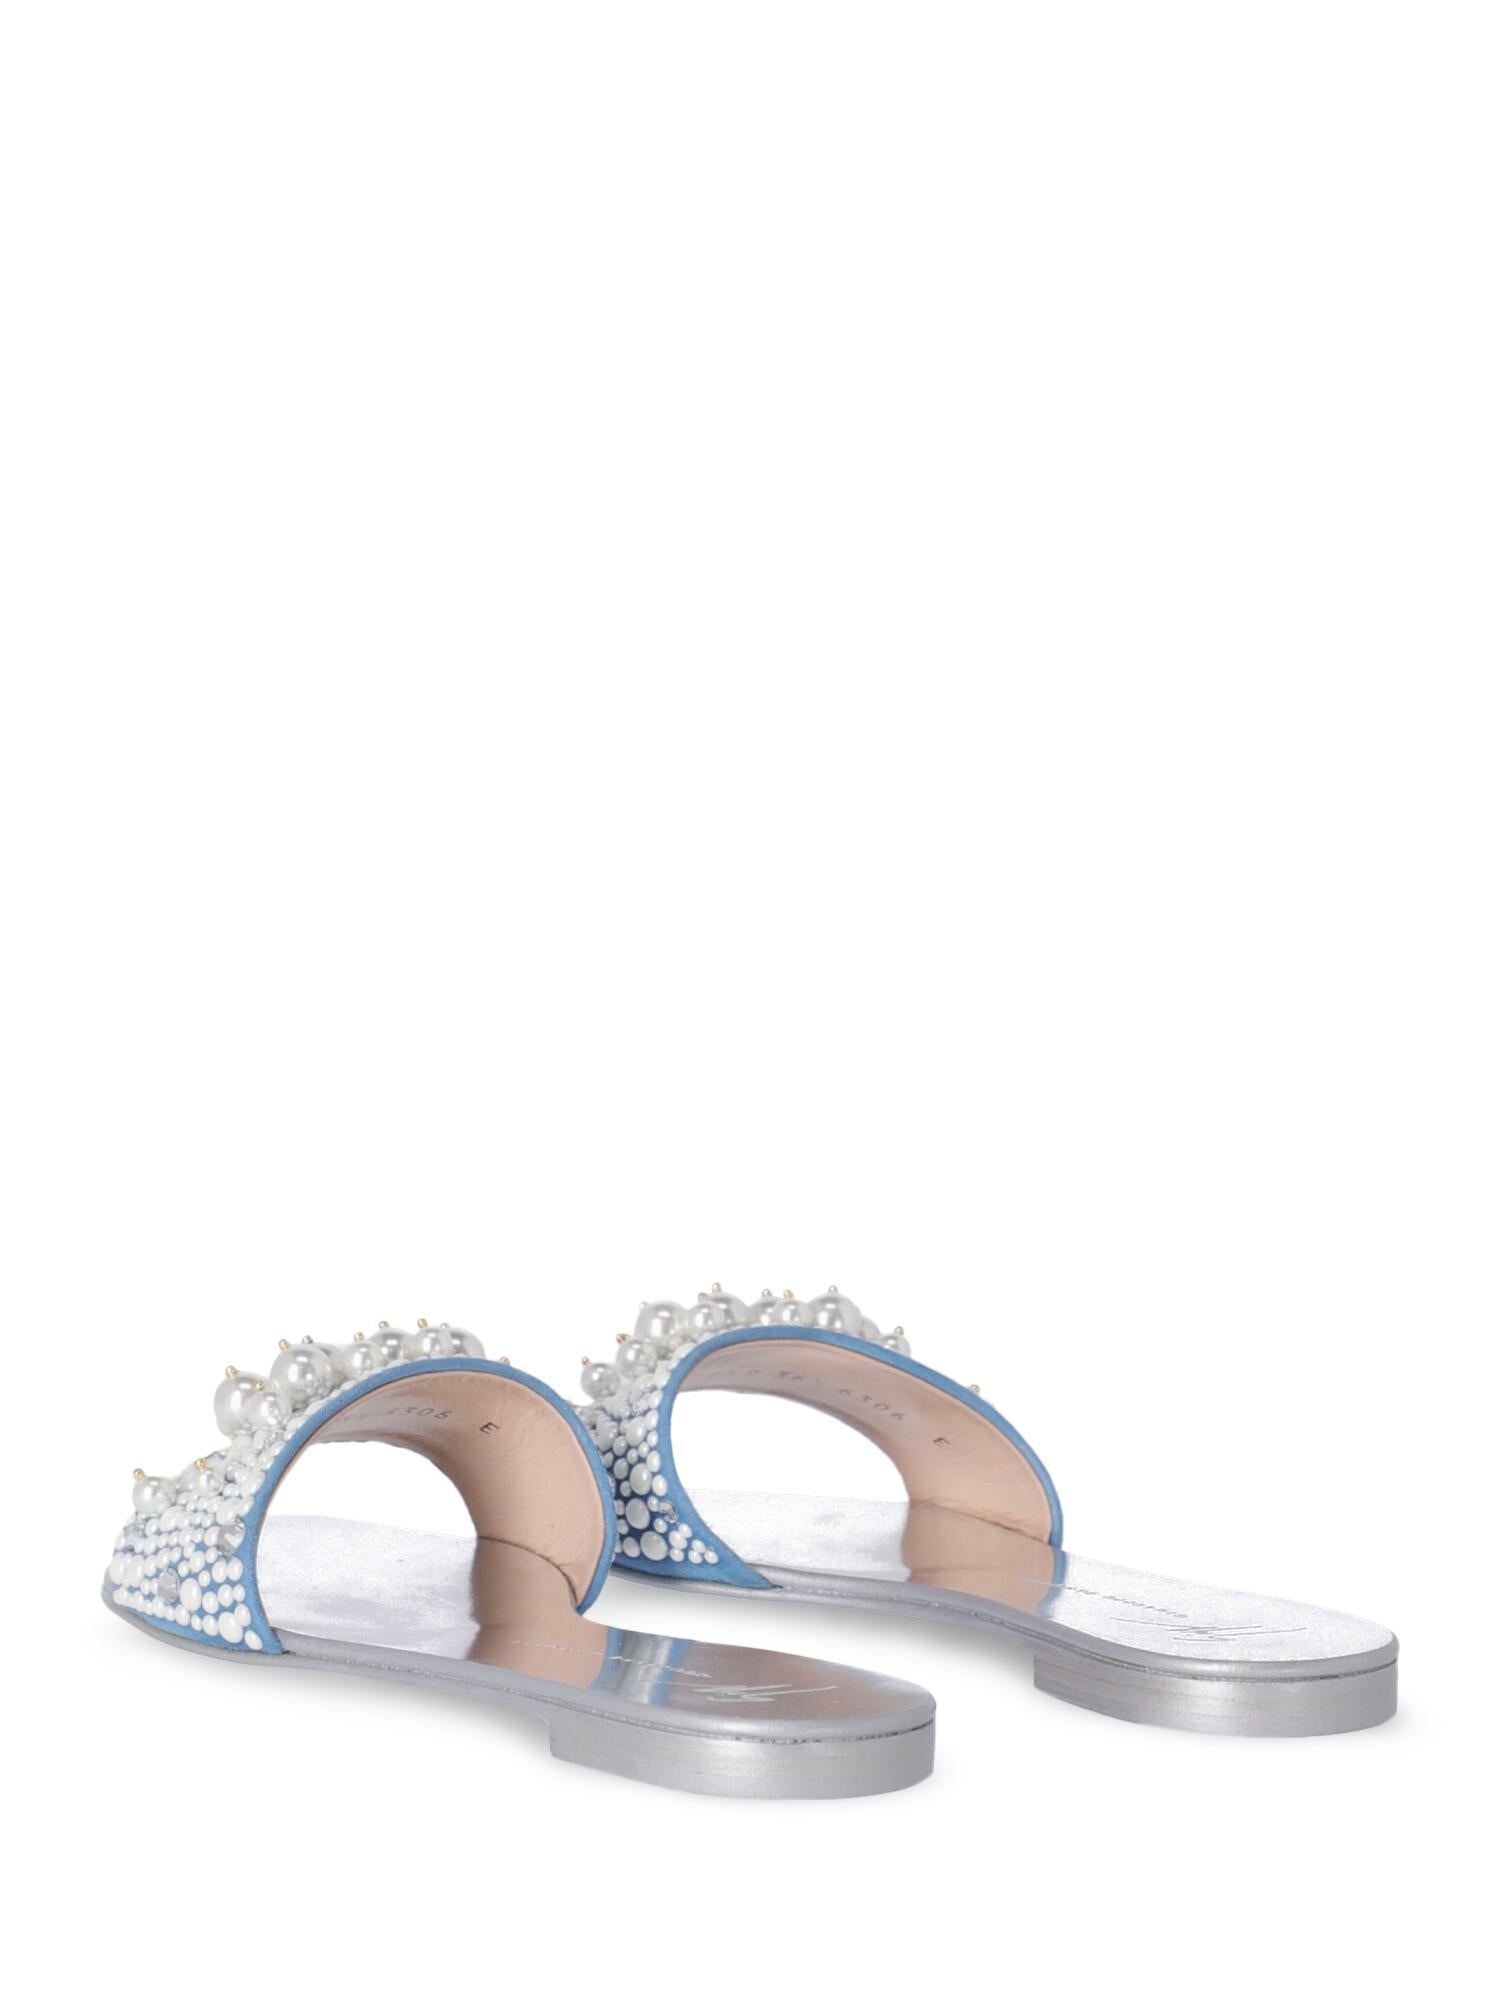 Giuseppe Zanotti Woman Slippers Silver EU 36.5 In Excellent Condition For Sale In Milan, IT